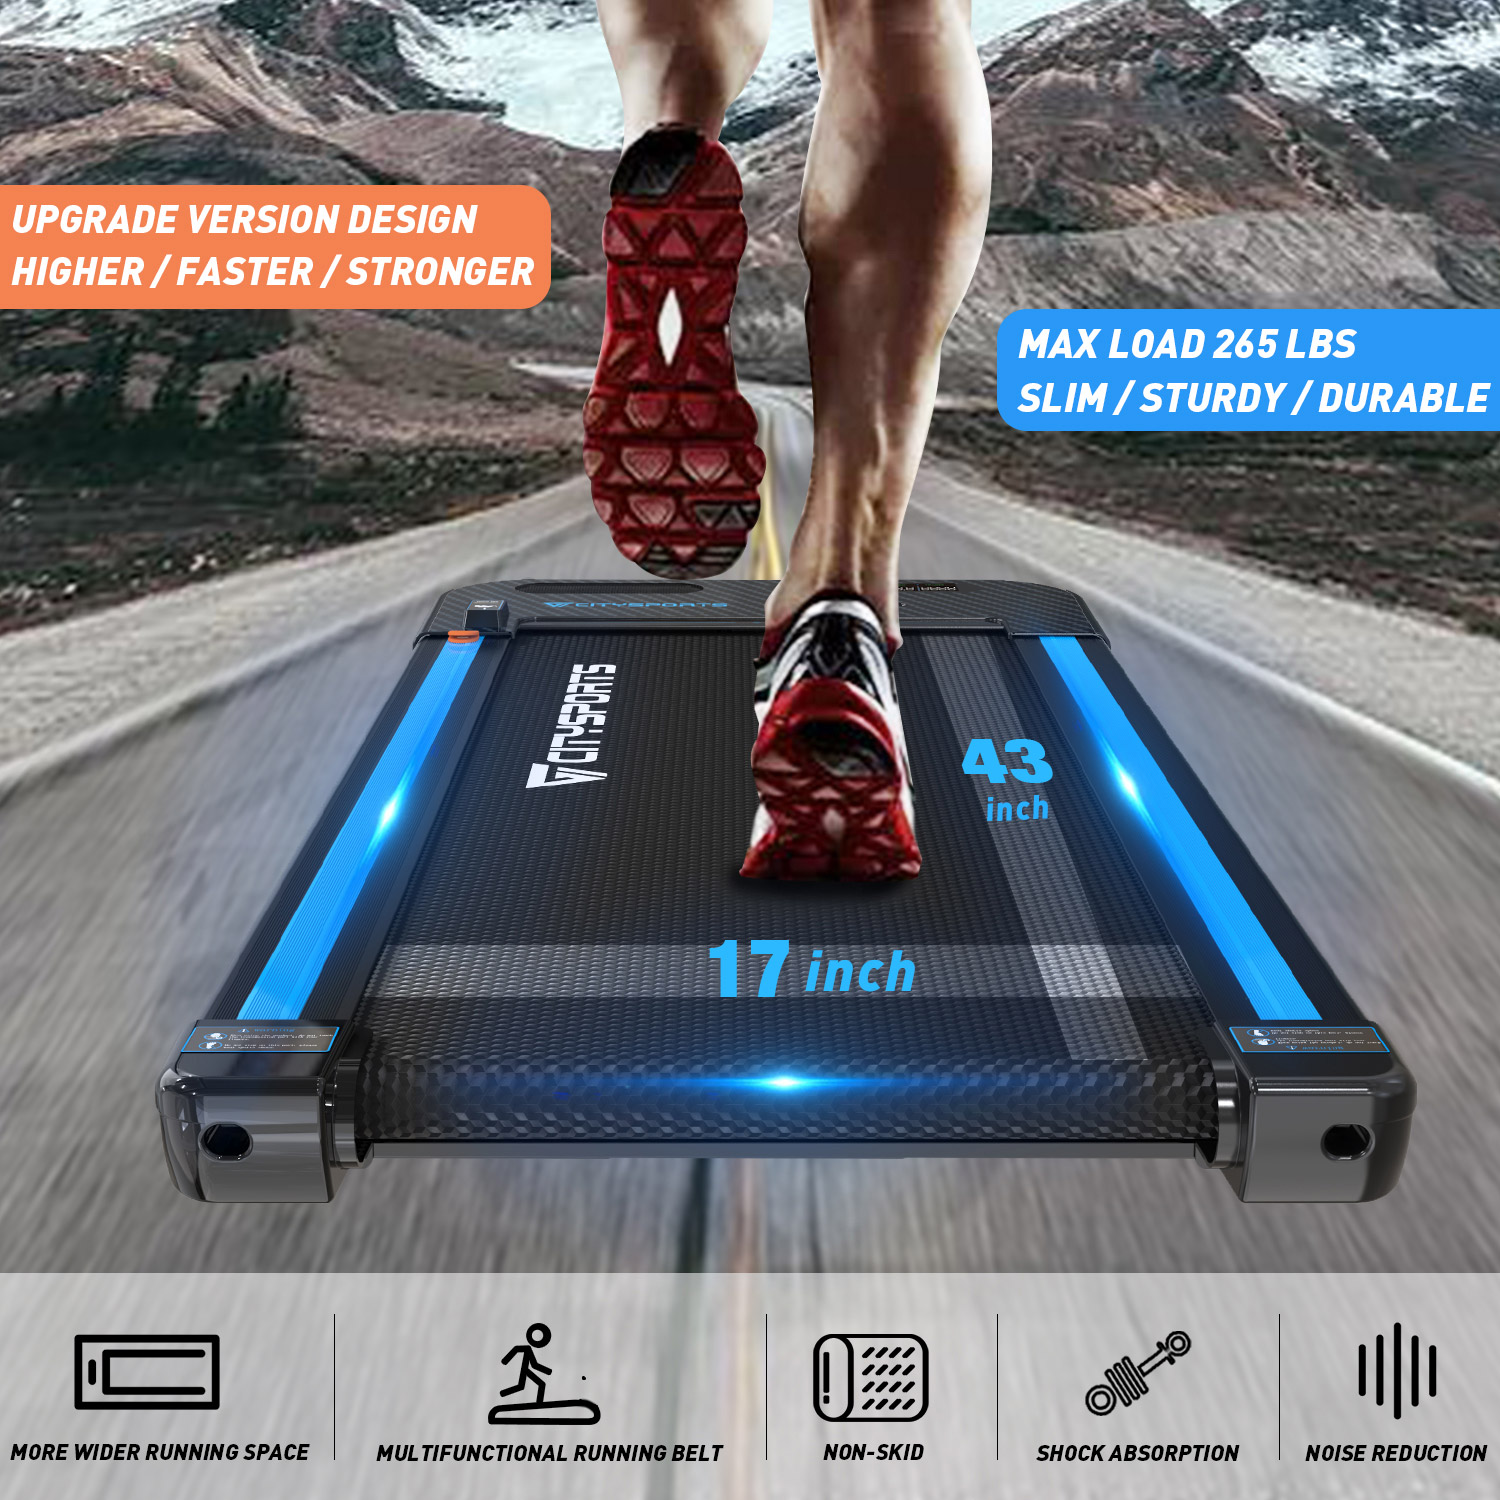 Gearstone Treadmills for Home, CITYSPORTS Walking Pad Treadmill with Audio Speakers, Slim & Portable - image 5 of 7